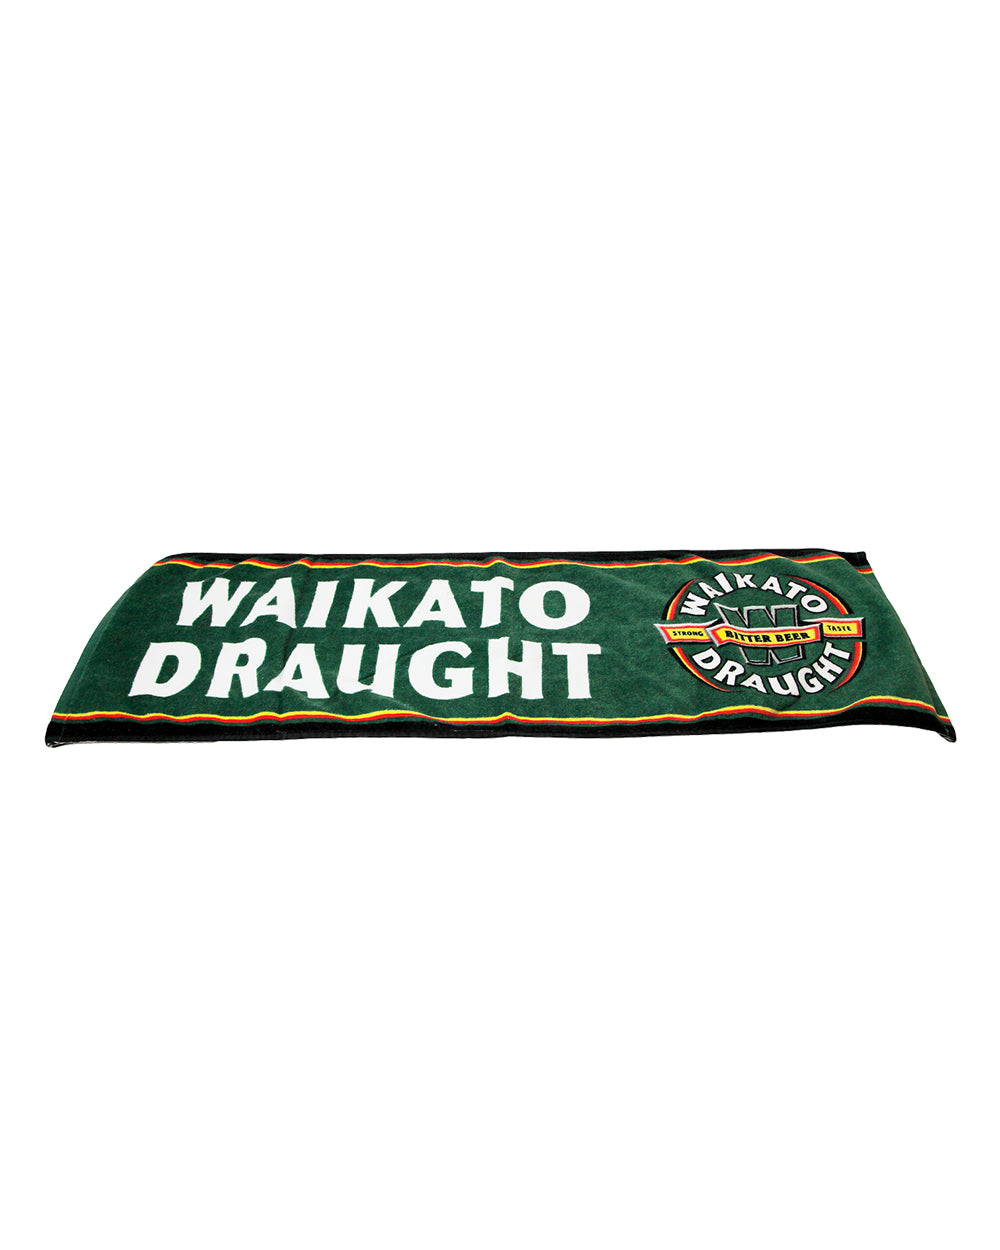 Waikato Draught Bar Towel -  Beer Gear Apparel & Merchandise - Speights - Lion Red - VB - Tokyo Dy merch